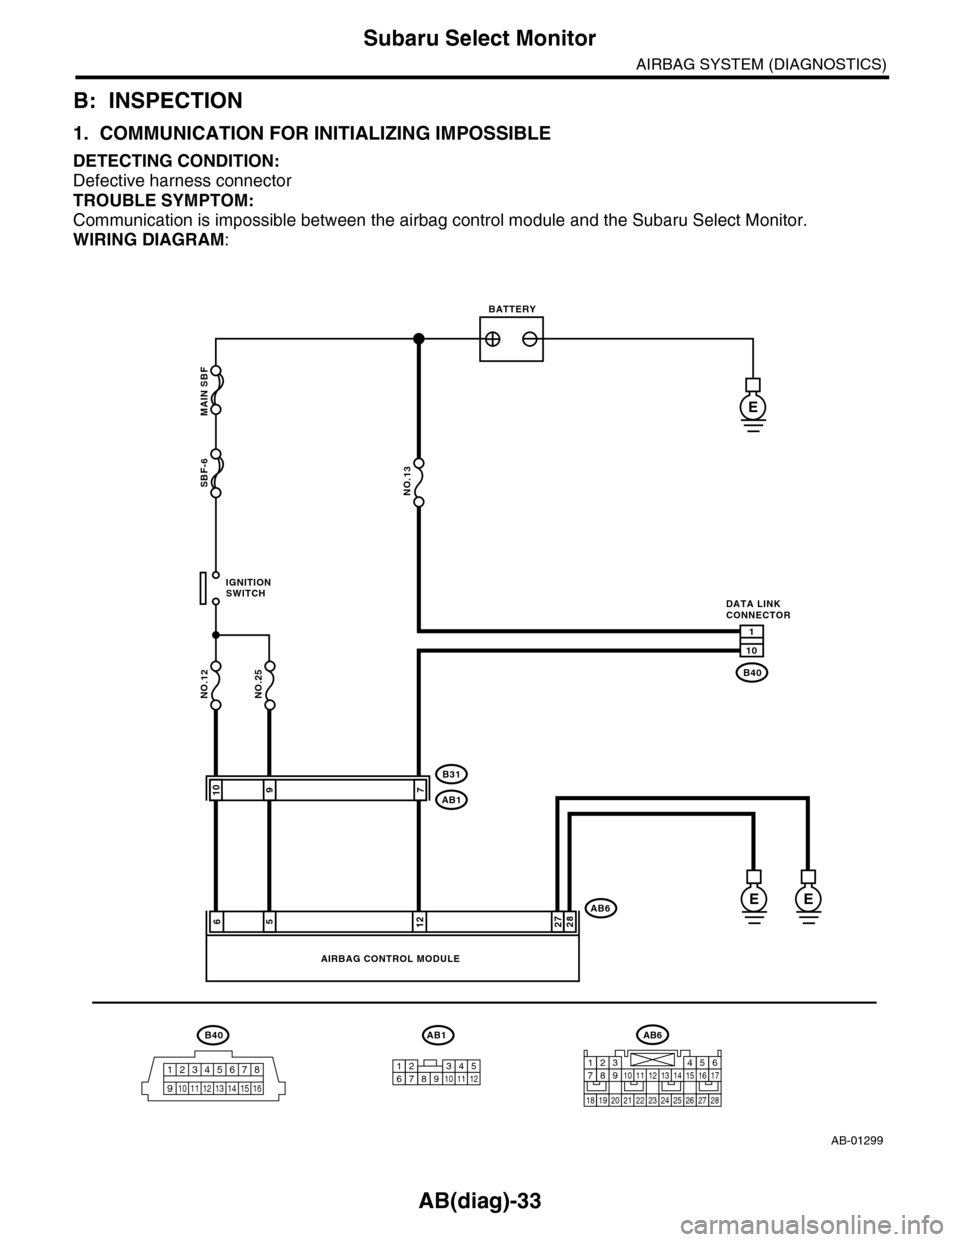 SUBARU TRIBECA 2009 1.G Service Workshop Manual AB(diag)-33
Subaru Select Monitor
AIRBAG SYSTEM (DIAGNOSTICS)
B: INSPECTION
1. COMMUNICATION FOR INITIALIZING IMPOSSIBLE
DETECTING CONDITION:
Defective harness connector
TROUBLE SYMPTOM:
Communication